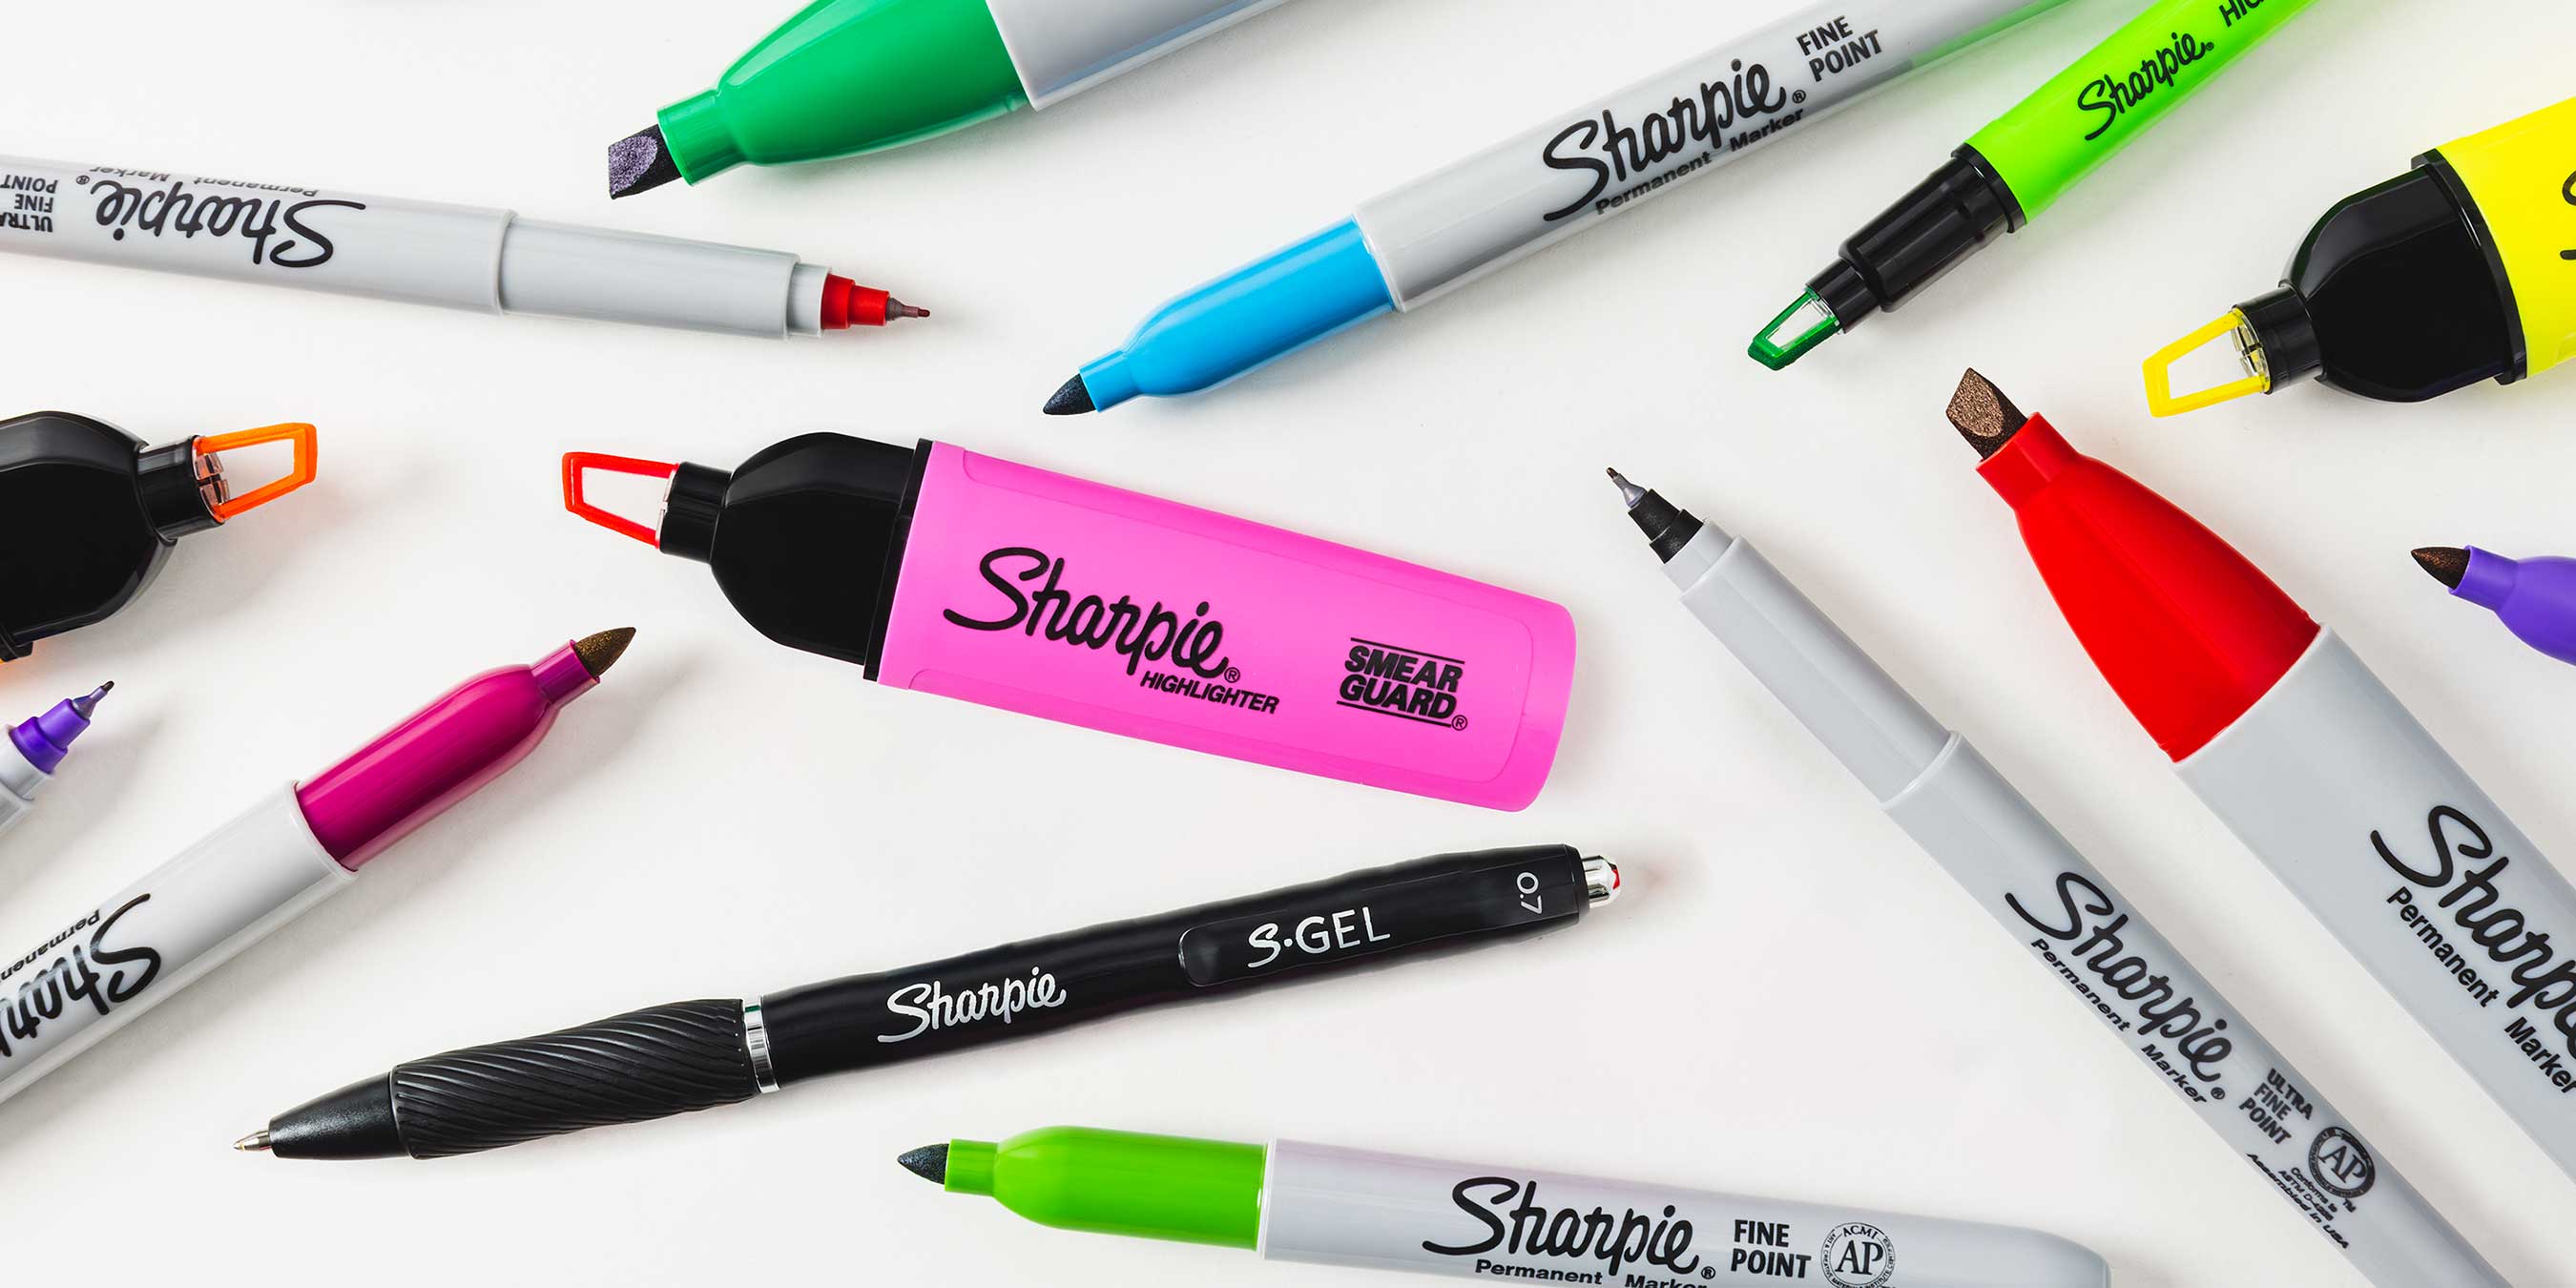 Sharpie® is launching the World Is Your Canvas campaign to showcase its full suite of products that have the ability to create something remarkable.